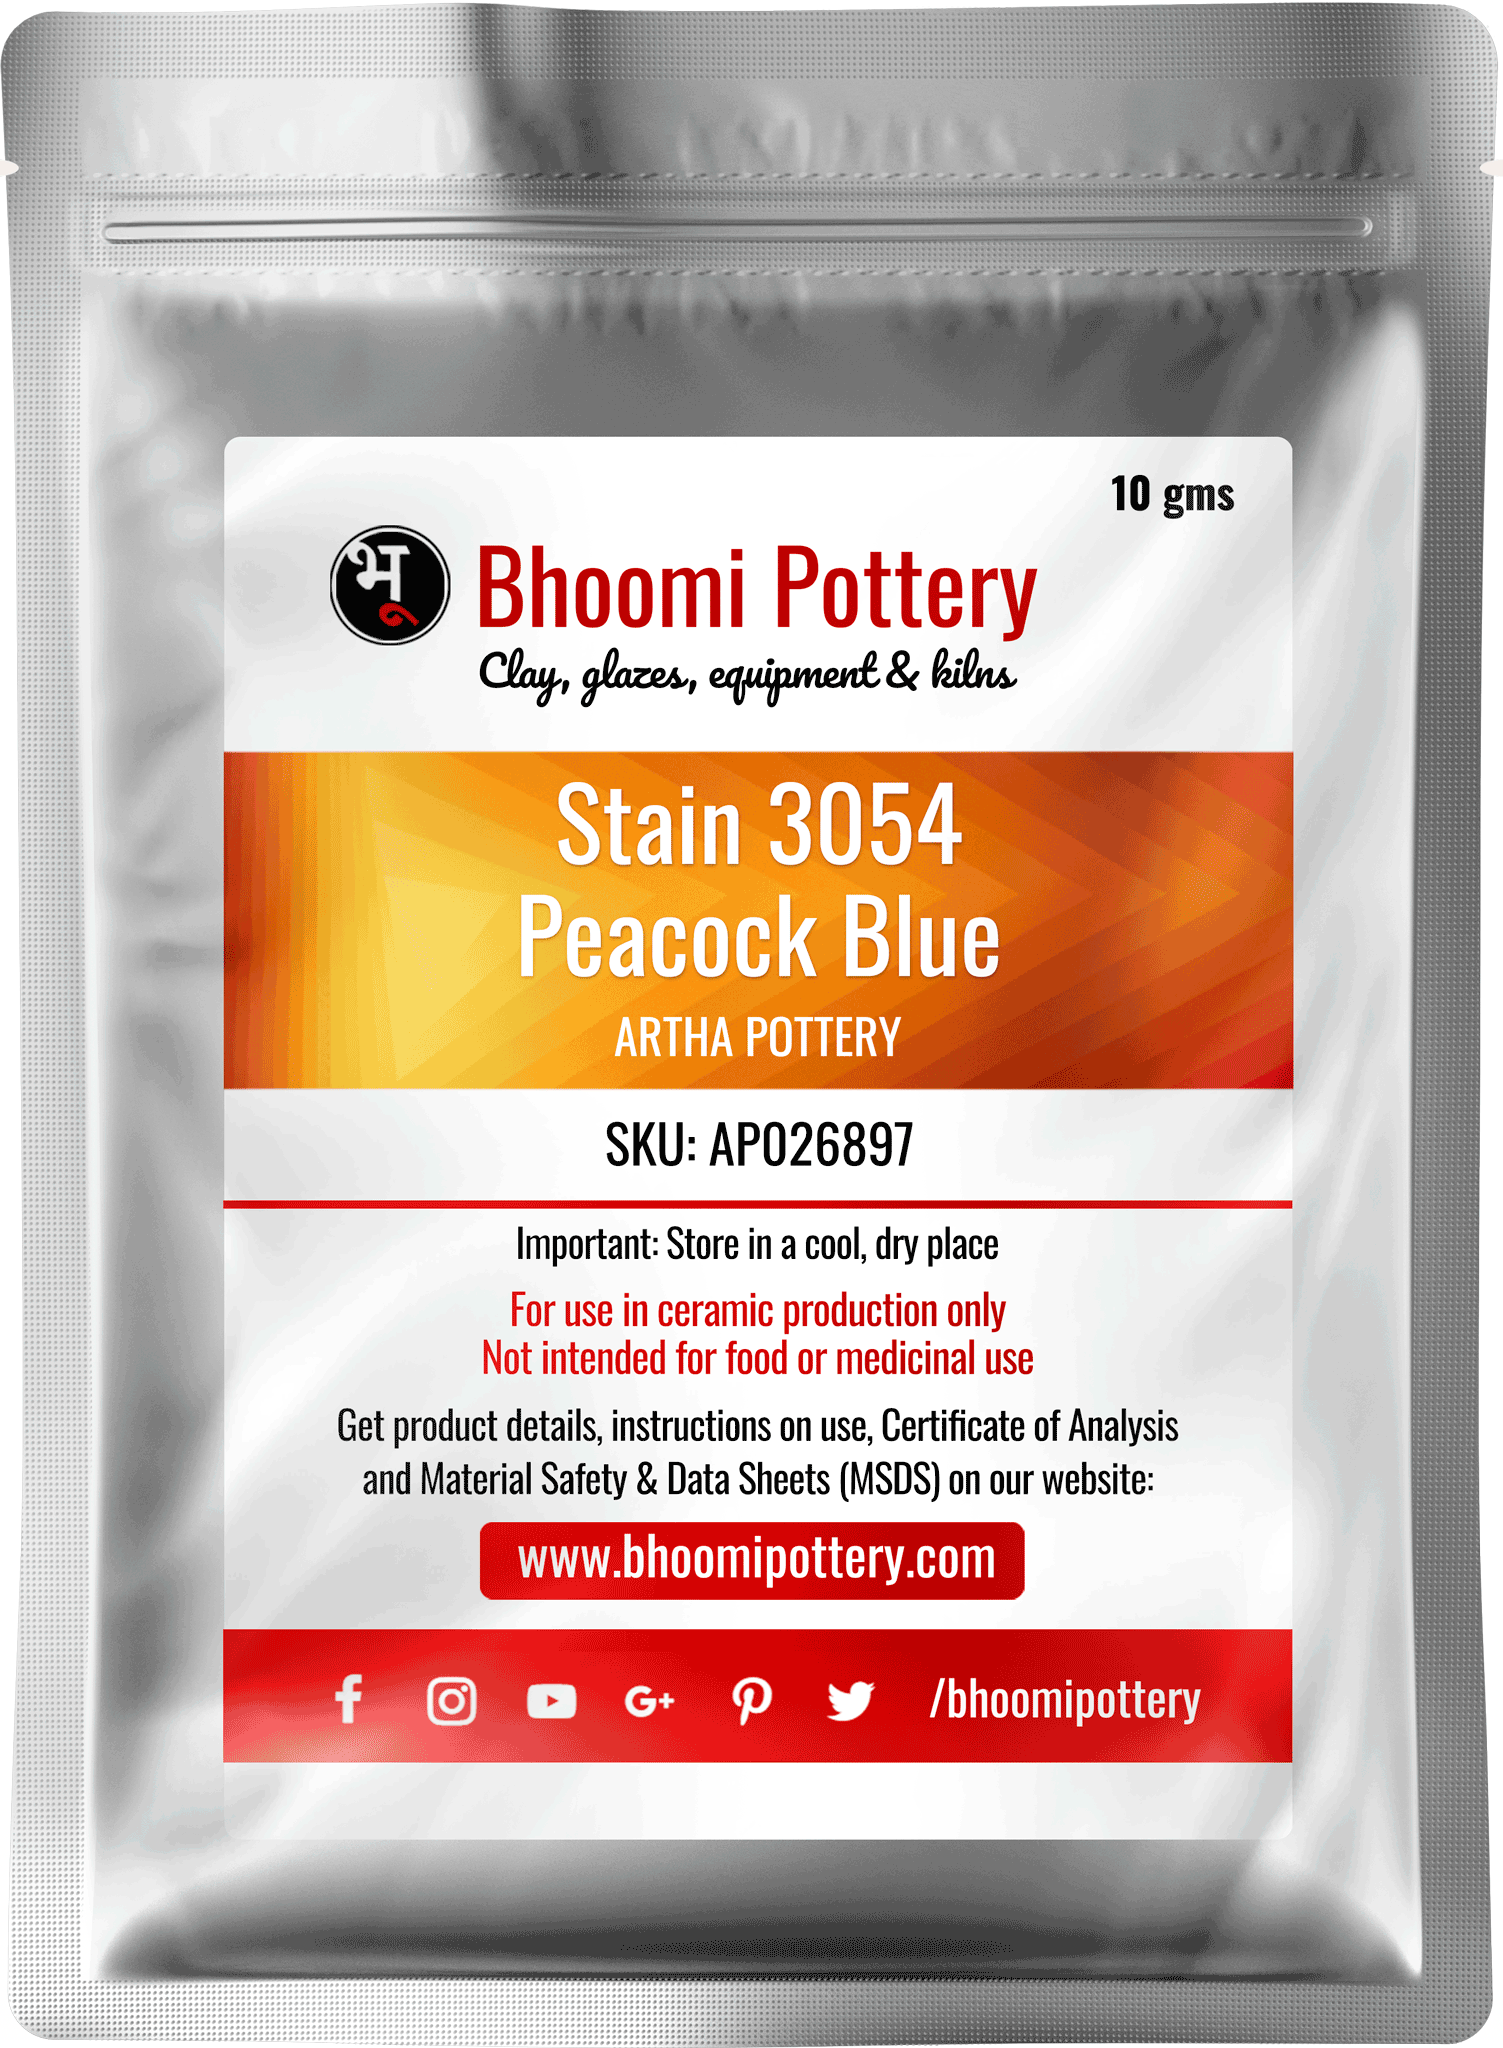 Artha Pottery Stain 3054 Peacock Blue 100 gms for sale in India - Bhoomi Pottery